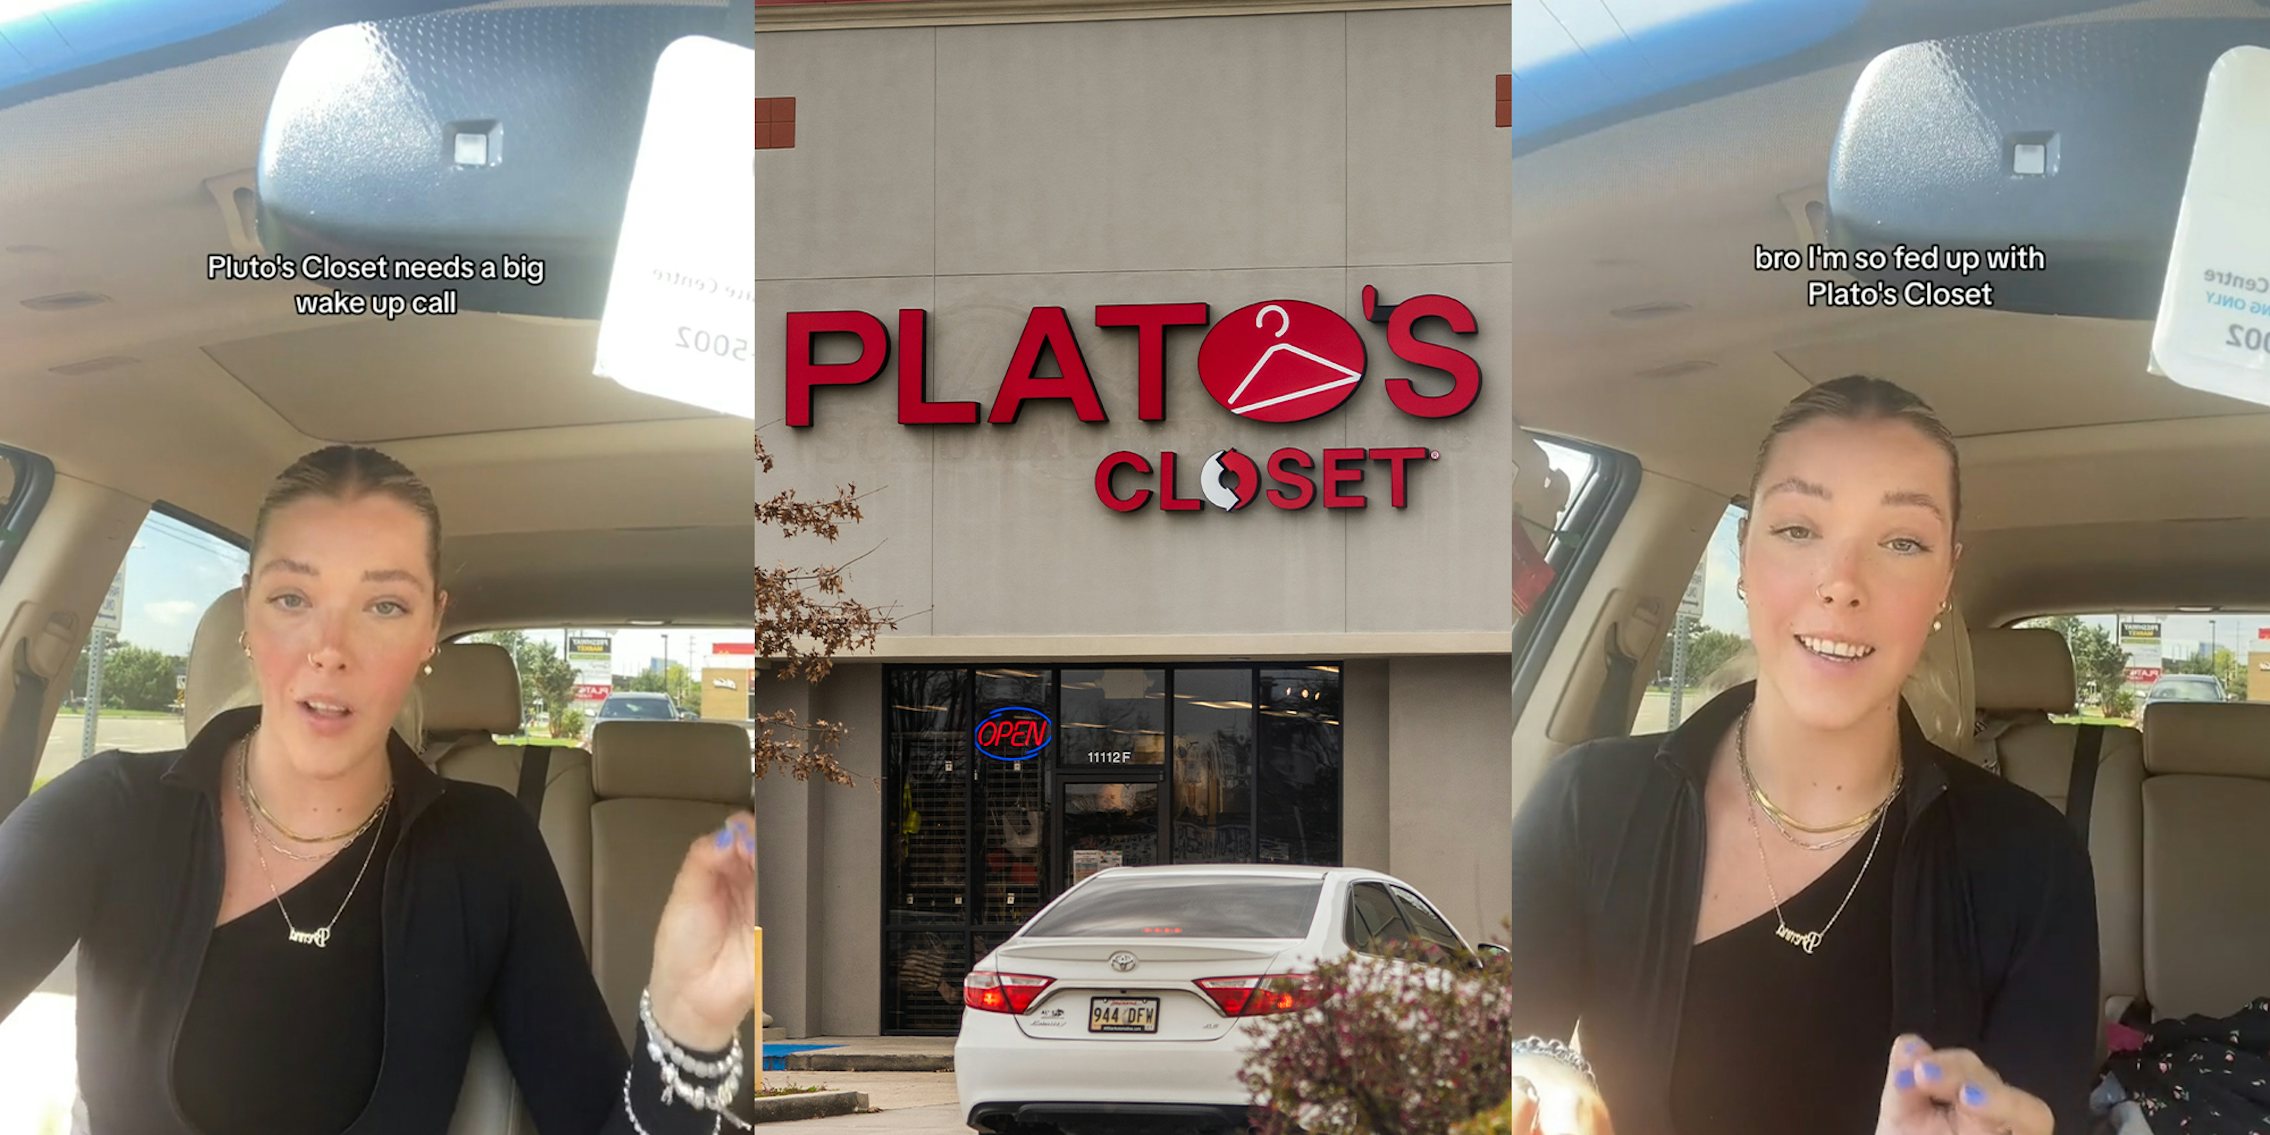 'Plato's closet is a slap in the face'